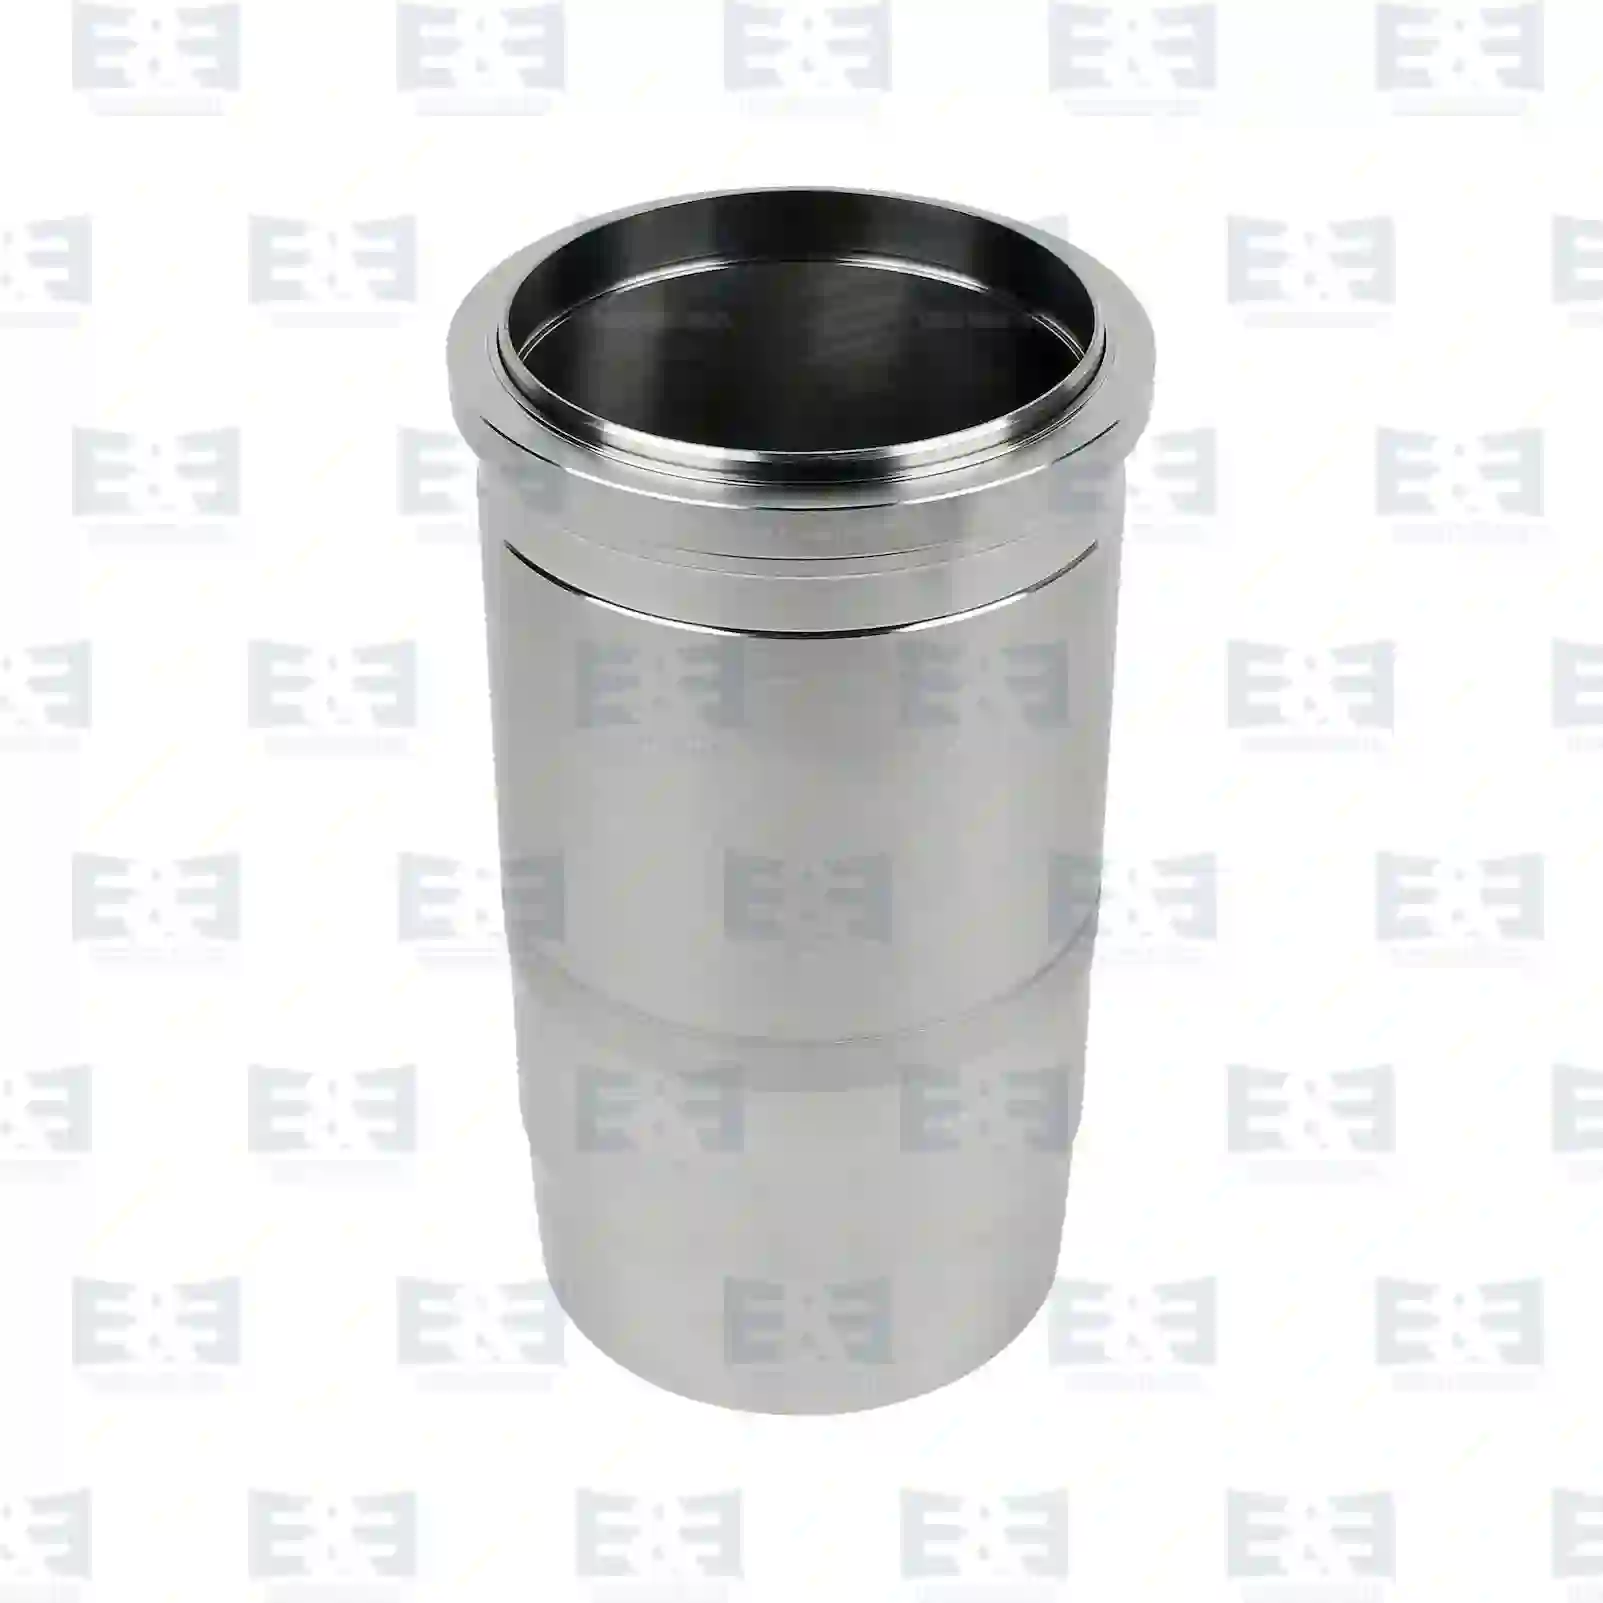 Cylinder liner, without seal rings, 2E2209953, 1696993, 1805846, 1812652, 1819534, 1822947, 1828571, 1849719, 1865154 ||  2E2209953 E&E Truck Spare Parts | Truck Spare Parts, Auotomotive Spare Parts Cylinder liner, without seal rings, 2E2209953, 1696993, 1805846, 1812652, 1819534, 1822947, 1828571, 1849719, 1865154 ||  2E2209953 E&E Truck Spare Parts | Truck Spare Parts, Auotomotive Spare Parts